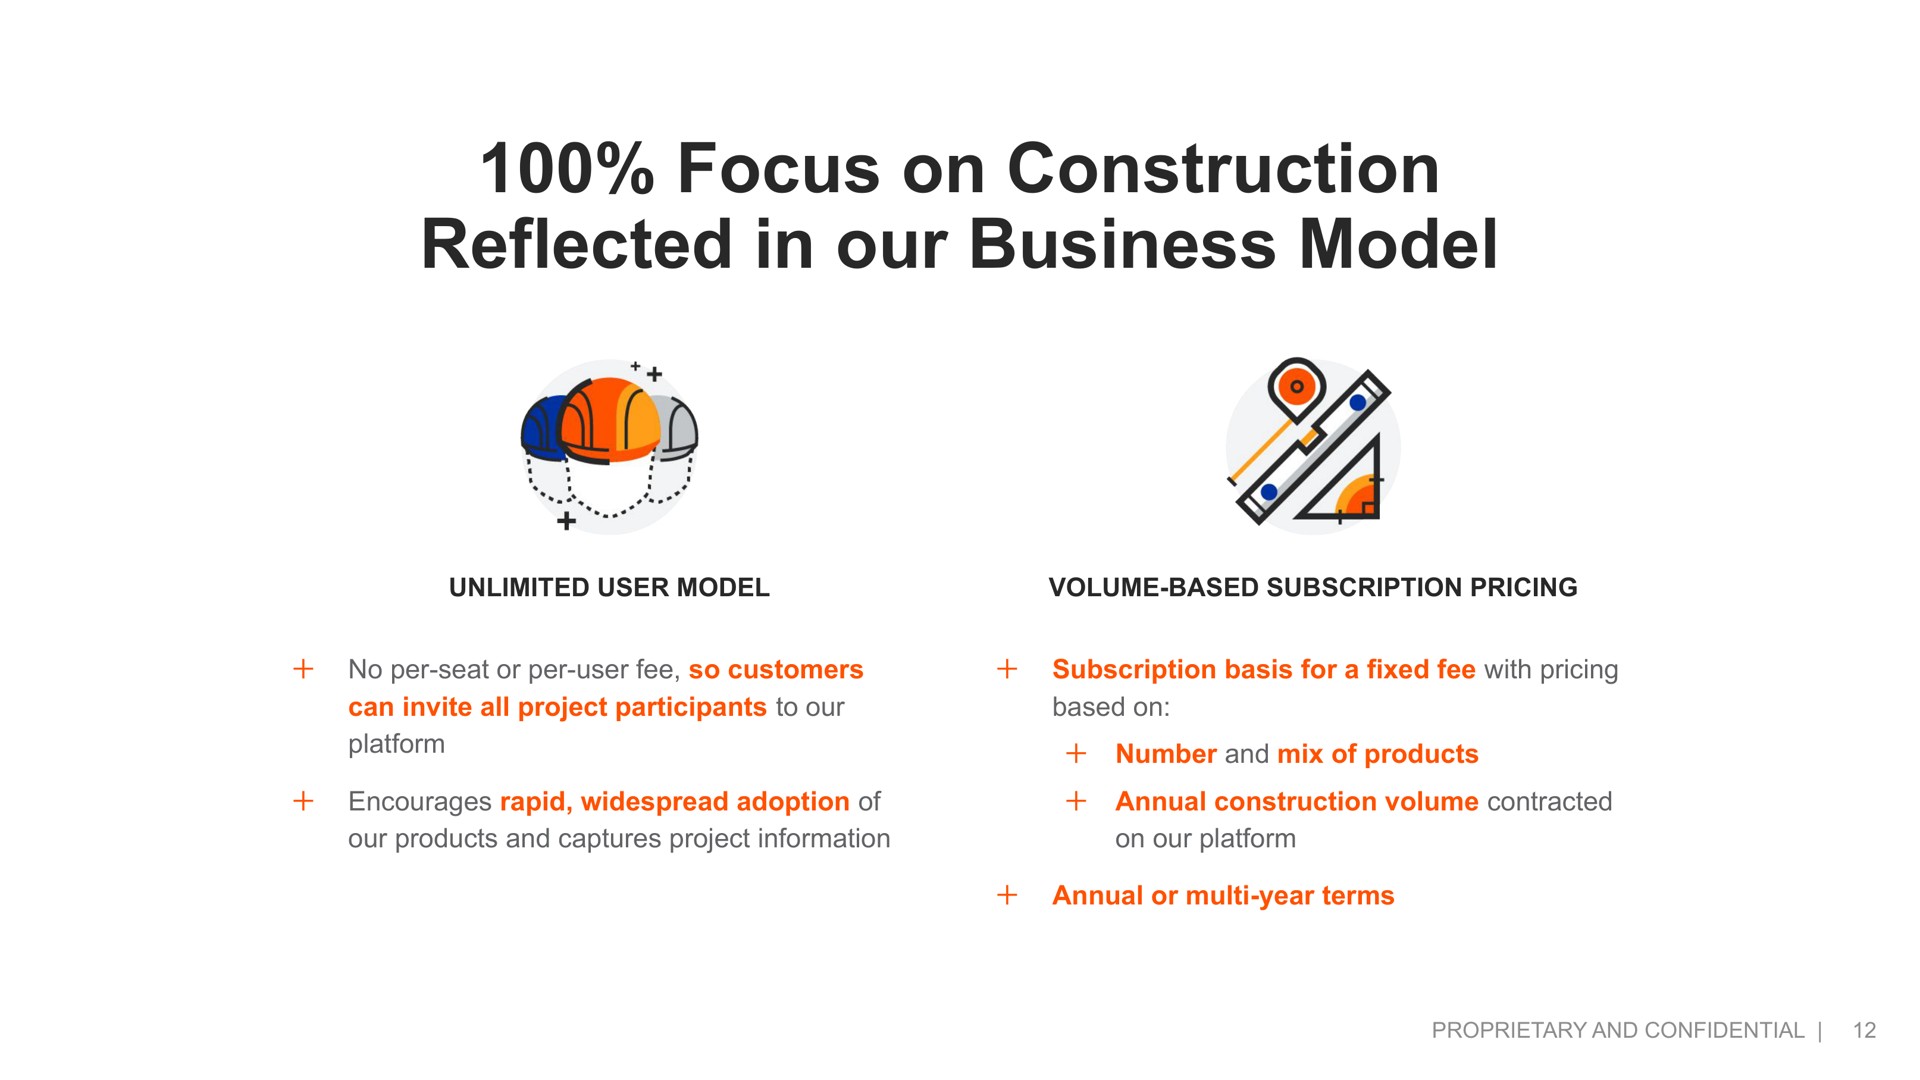 focus on construction reflected in our business model | Procore